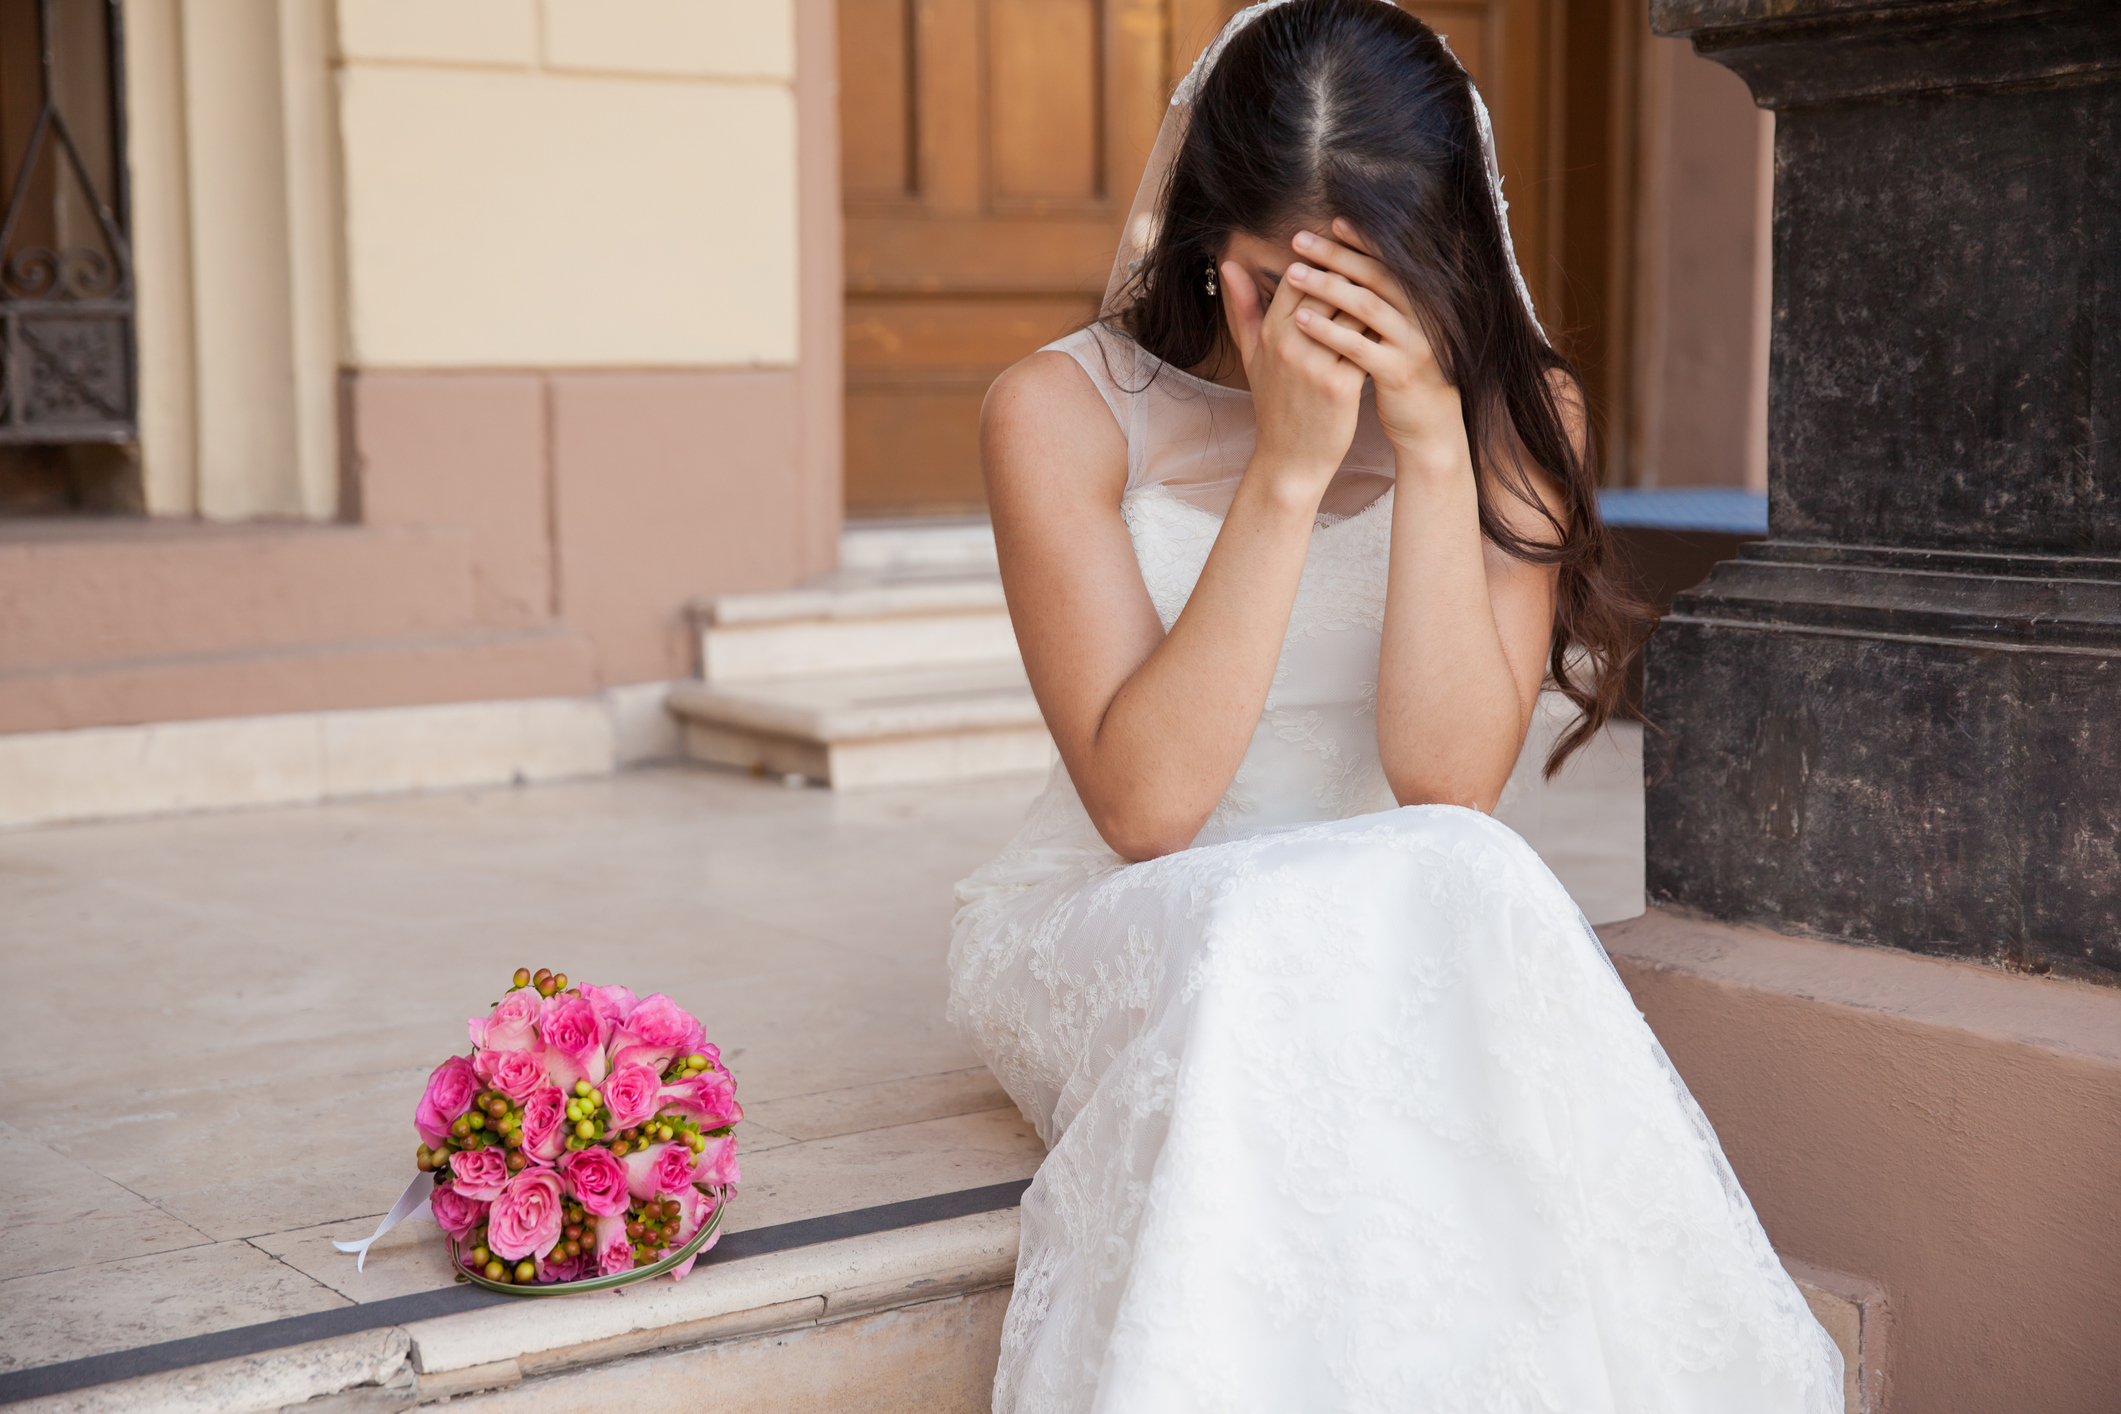 A bride sitting on steps, covering her face with her hands, a bouquet of flowers beside her